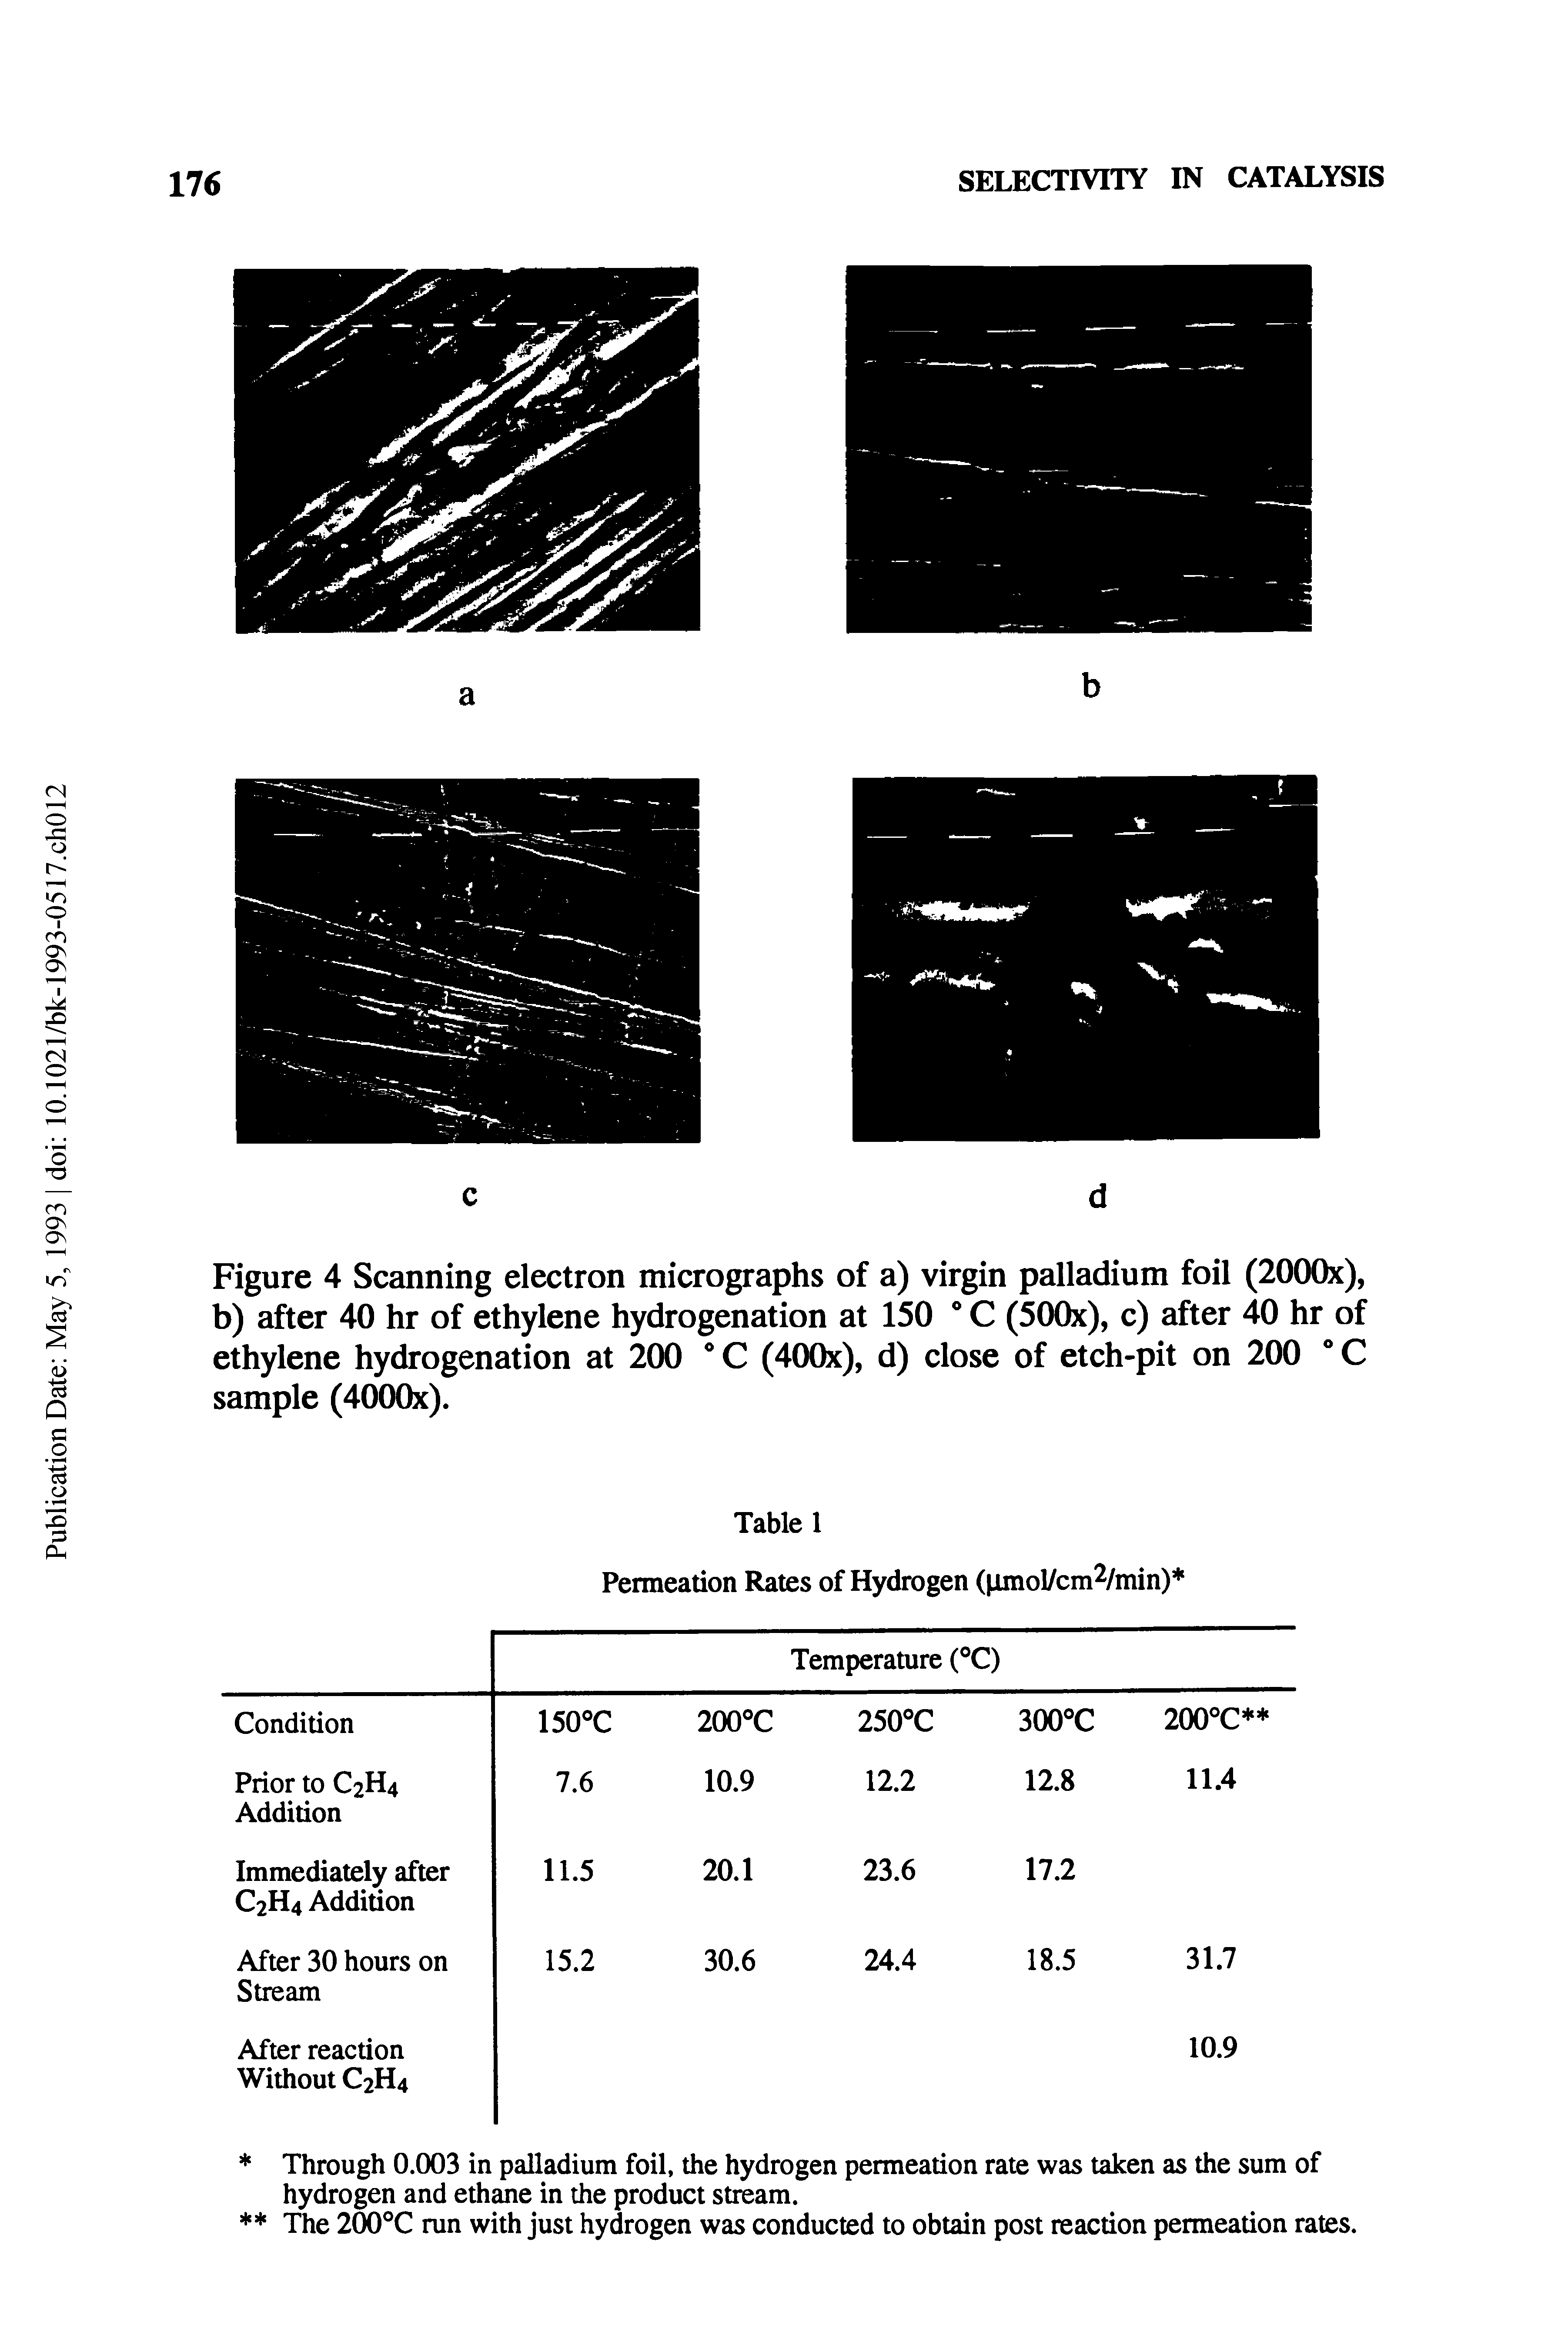 Figure 4 Scanning electron micrographs of a) virgin palladium foil (2000x), b) after 40 hr of ethylene hydrogenation at 150 ° C (500x), c) after 40 hr of ethylene hydrogenation at 200 ° C (400x), d) close of etch-pit on 200 ° C sample (4000x).